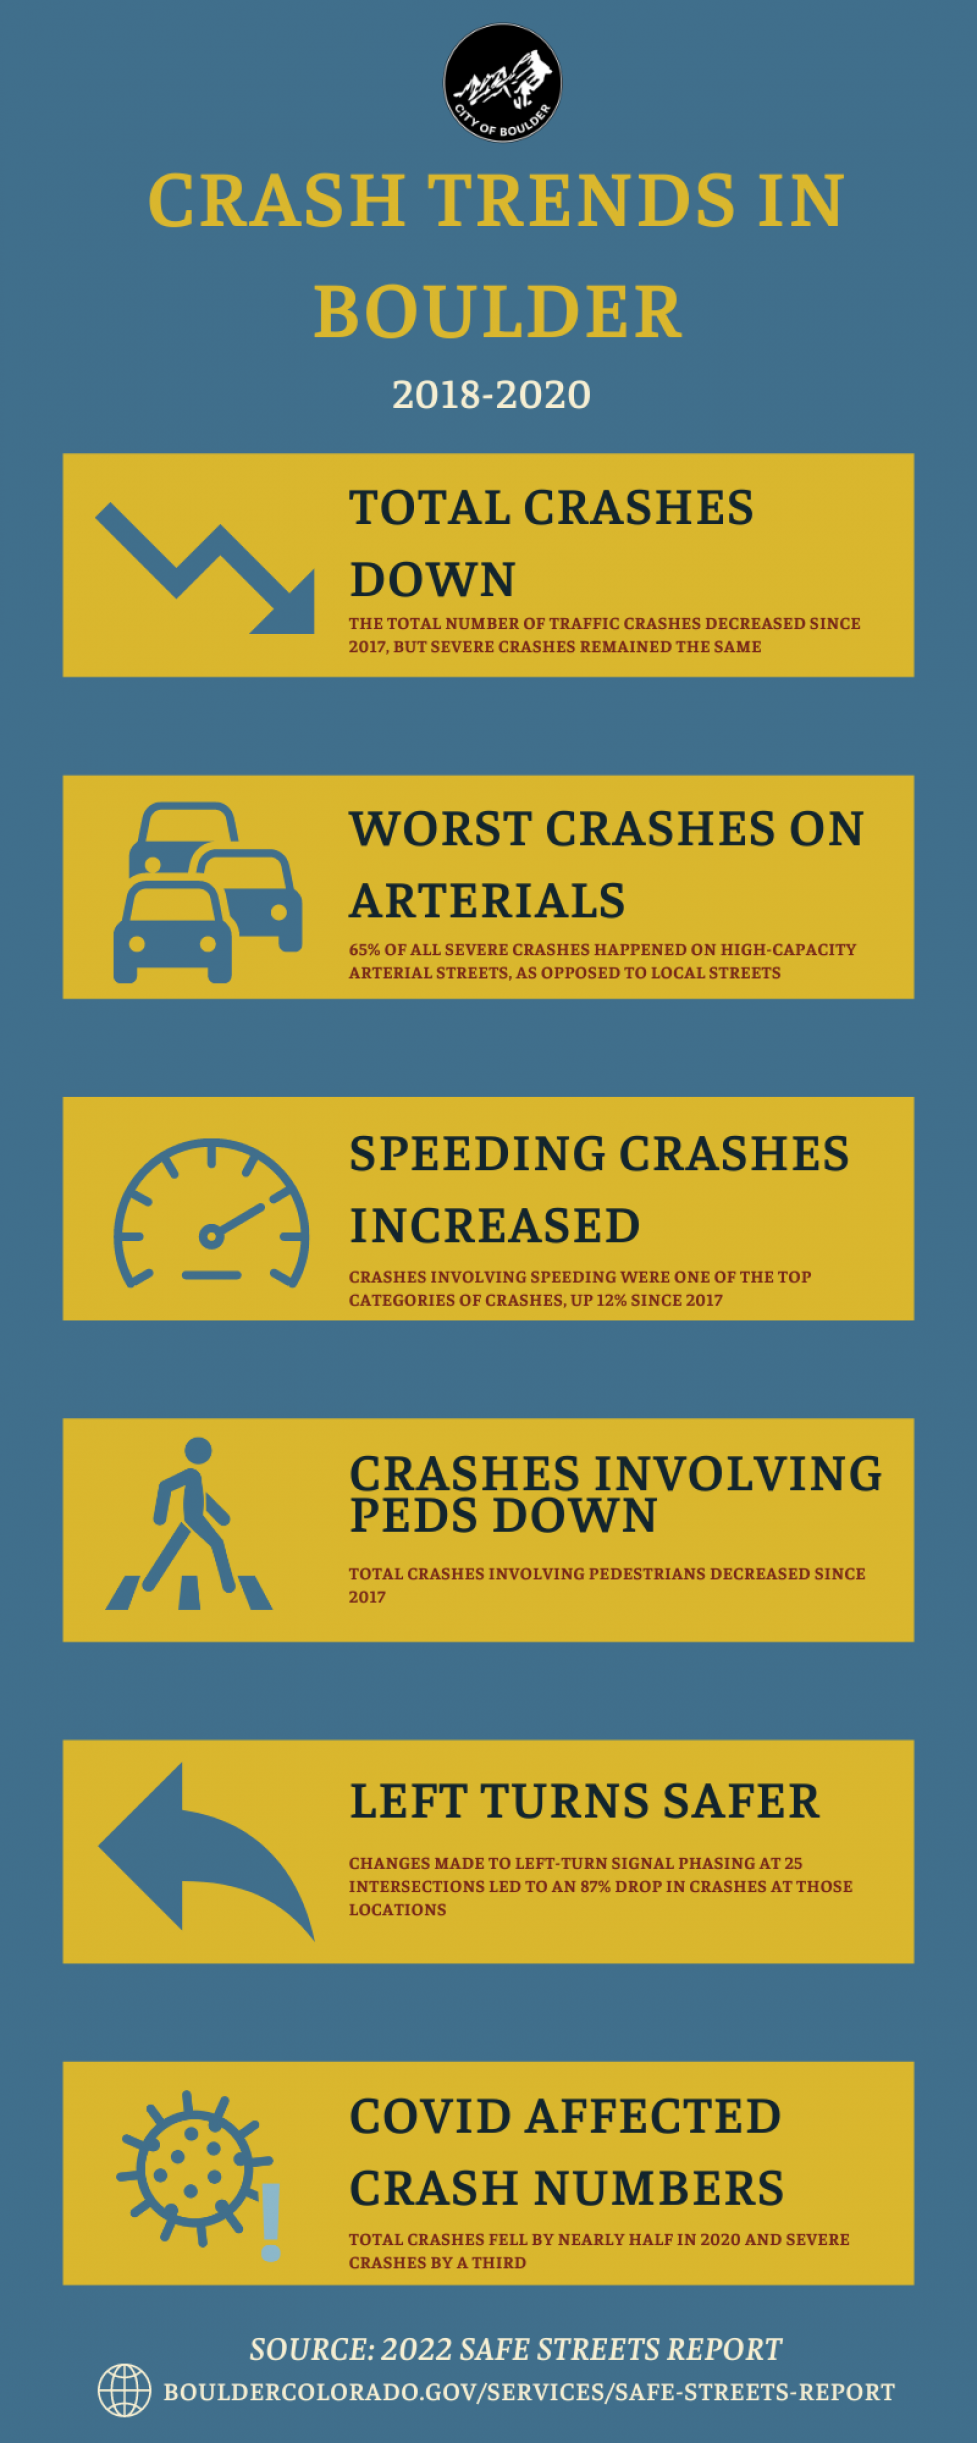 Safe Streets Report infographic